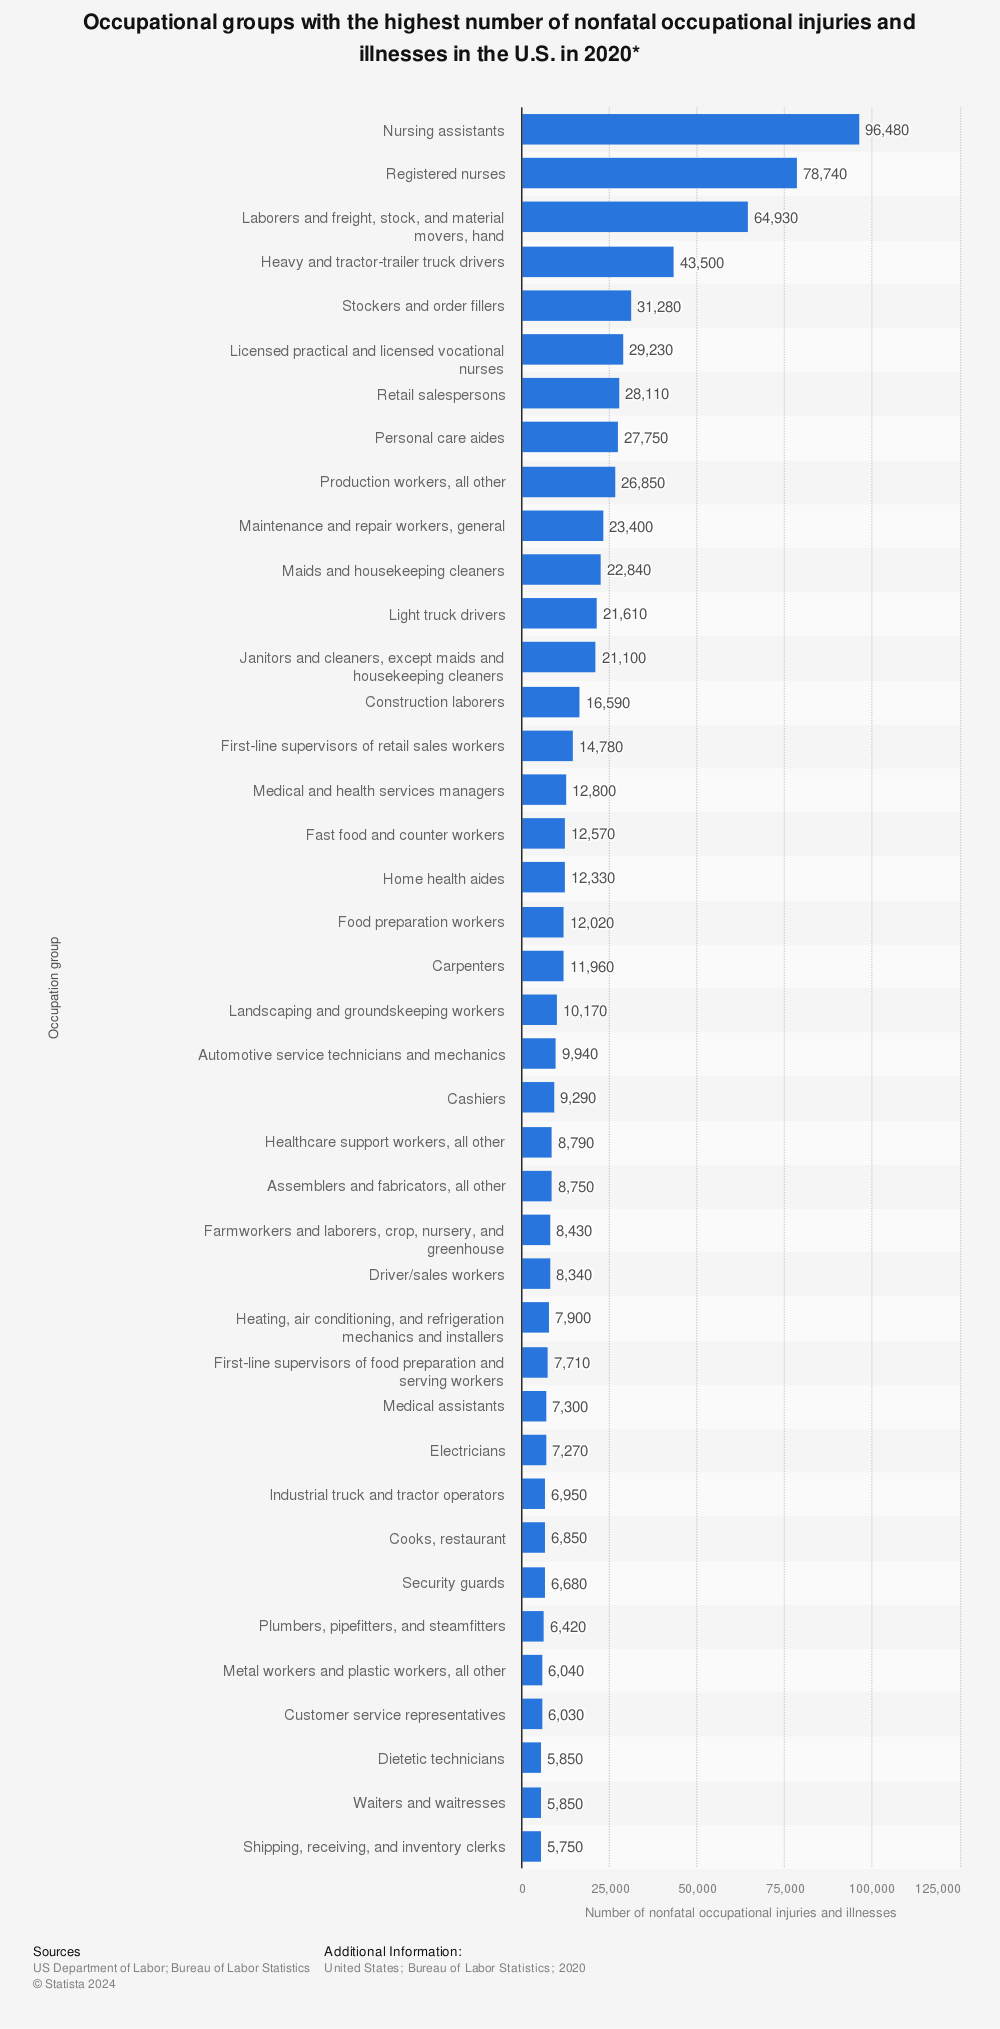 Statistic: Occupational groups with the highest number of nonfatal occupational injuries and illnesses in the U.S. in 2019* | Statista